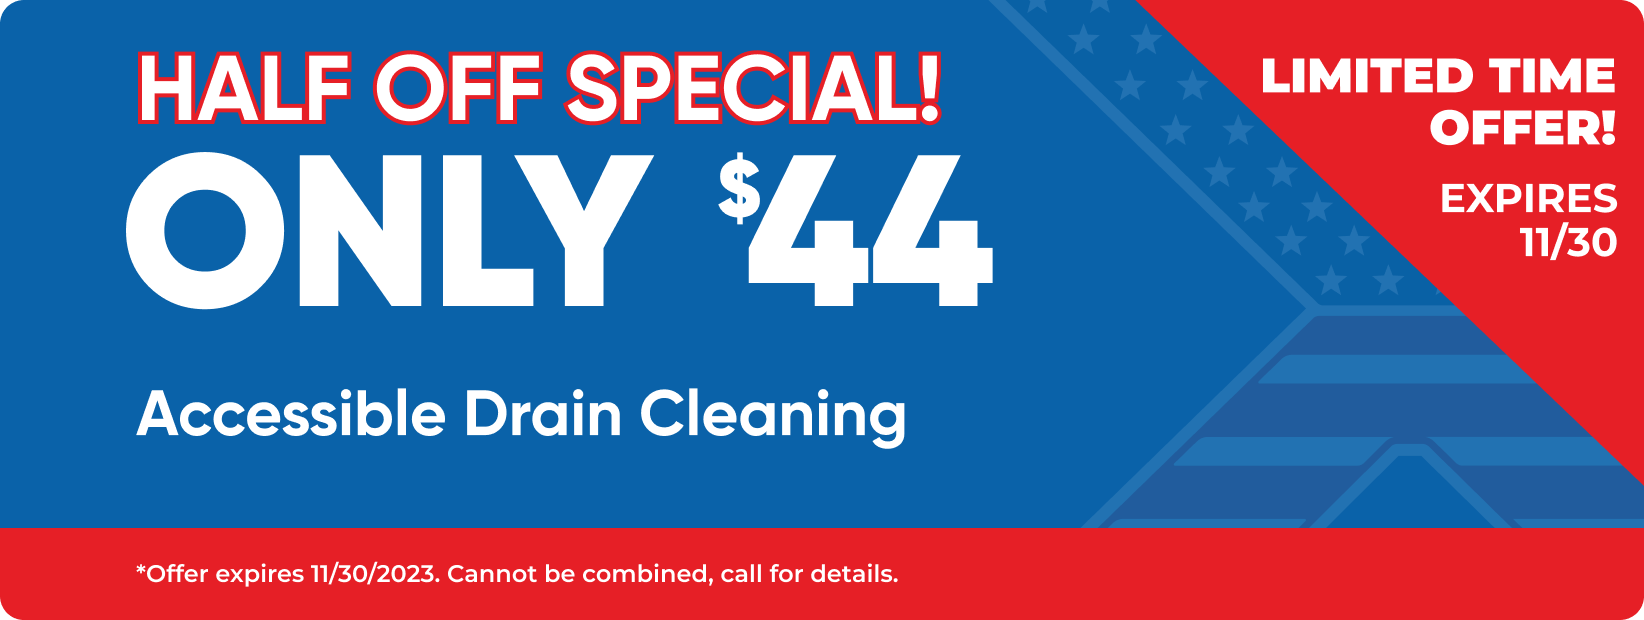 $88 Drain Cleaning Coupon